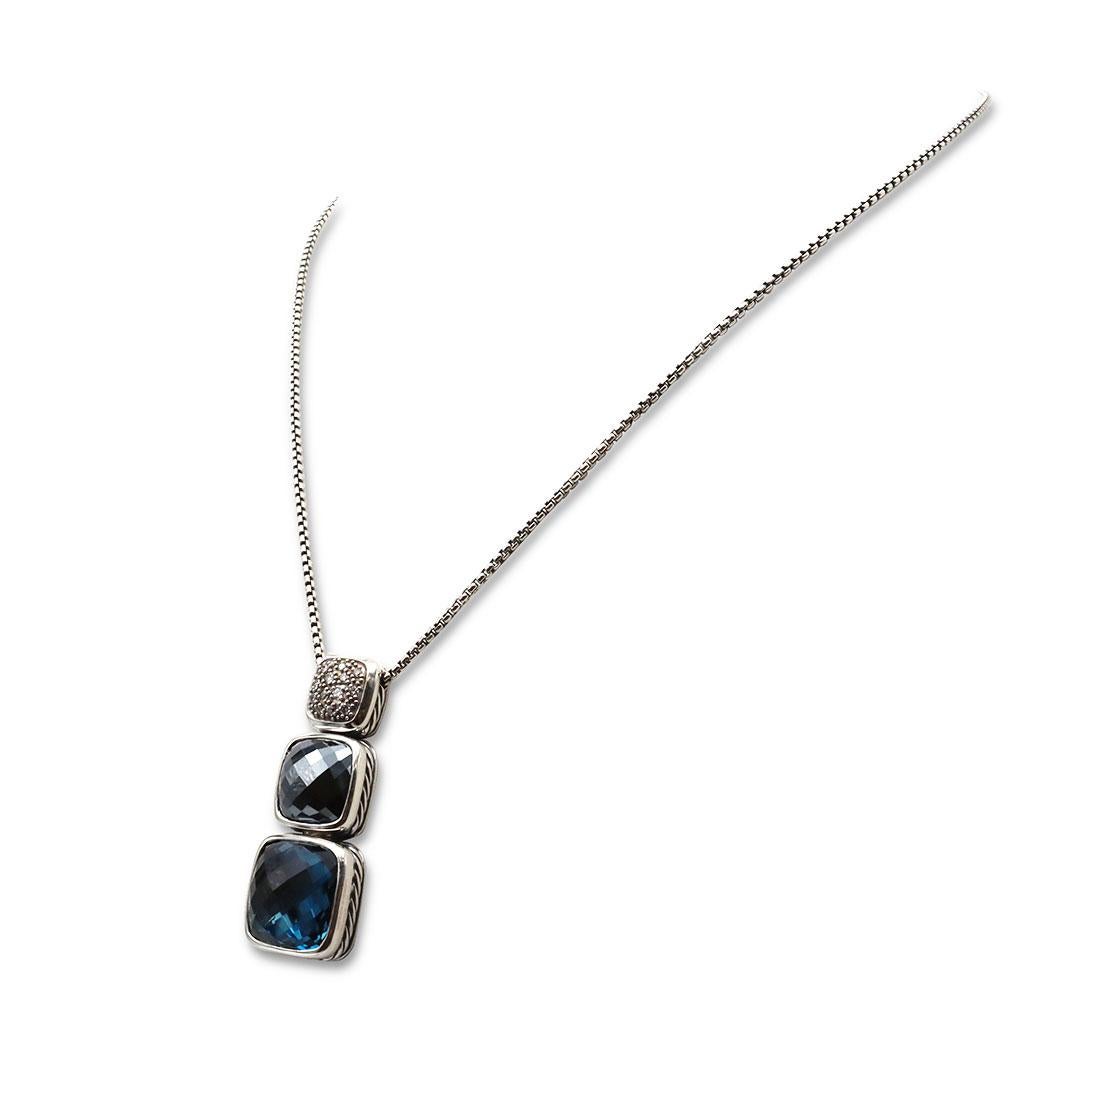 Authentic David Yurman Chiclet necklace crafted in sterling silver.  Featuring a three-tiered pendant set with faceted London blue topaz and hematite and pavé diamonds of an estimated .27 carats total weight.  The pendant hangs from a 17.5 inch